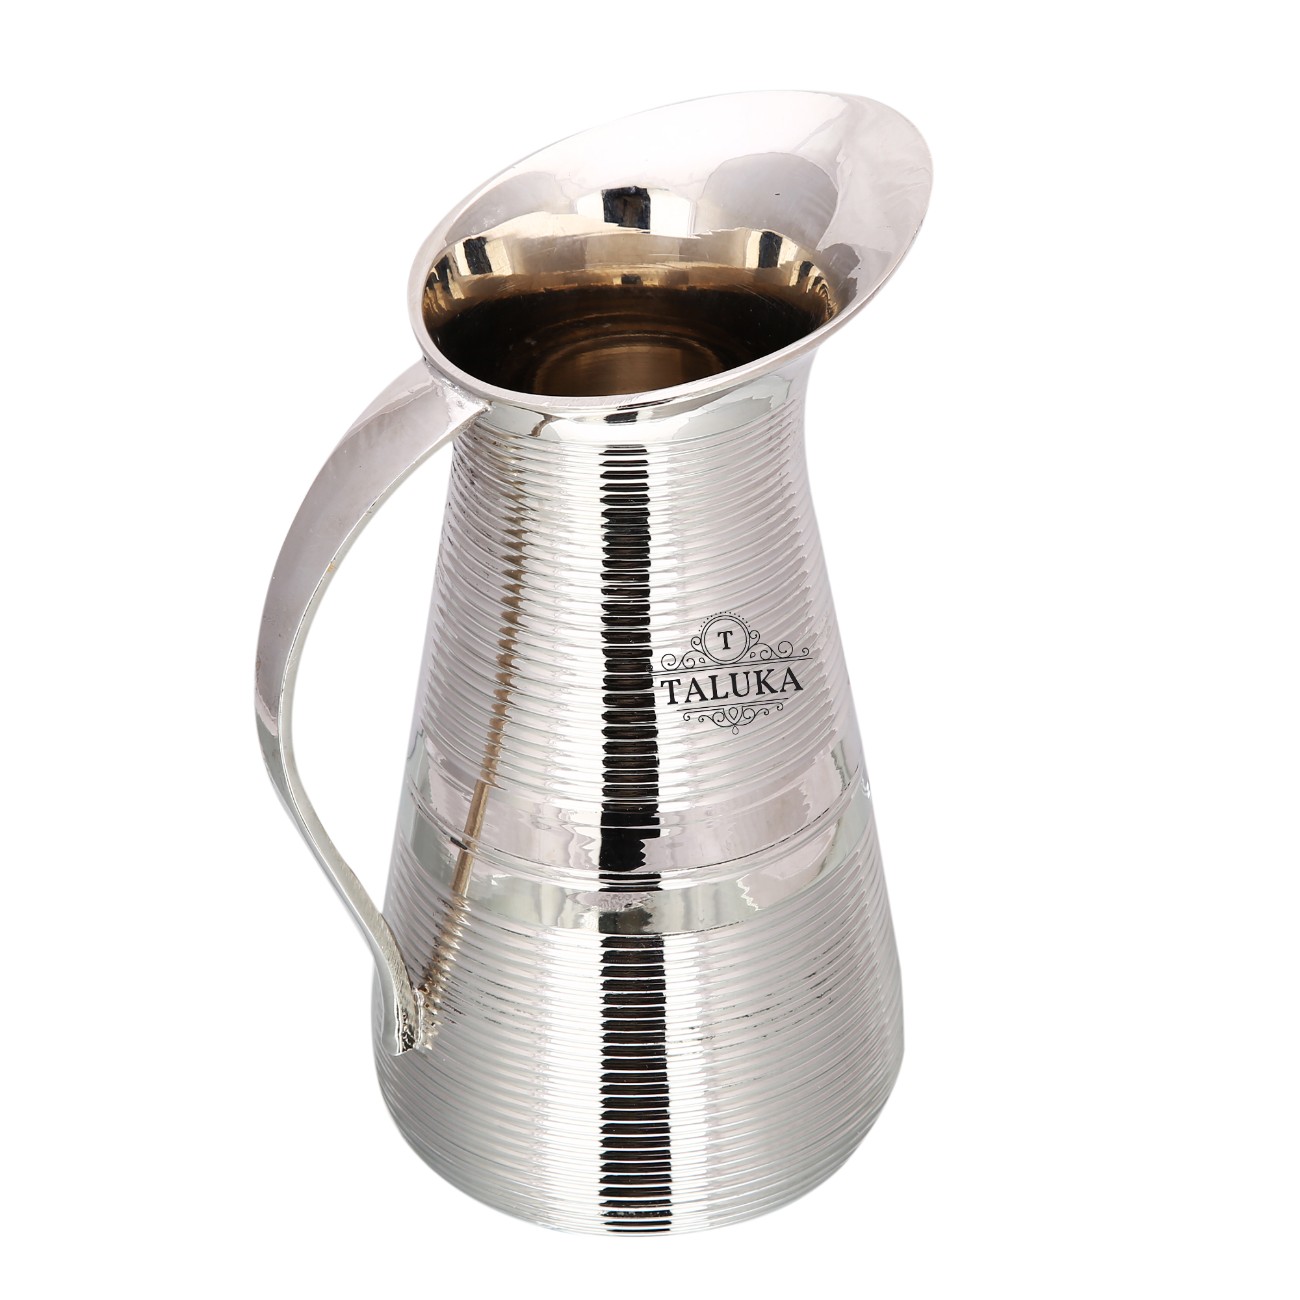 Brass Nickel Plated Jug Water Pitcher For Storage For Home Hotel Gifting Purpose